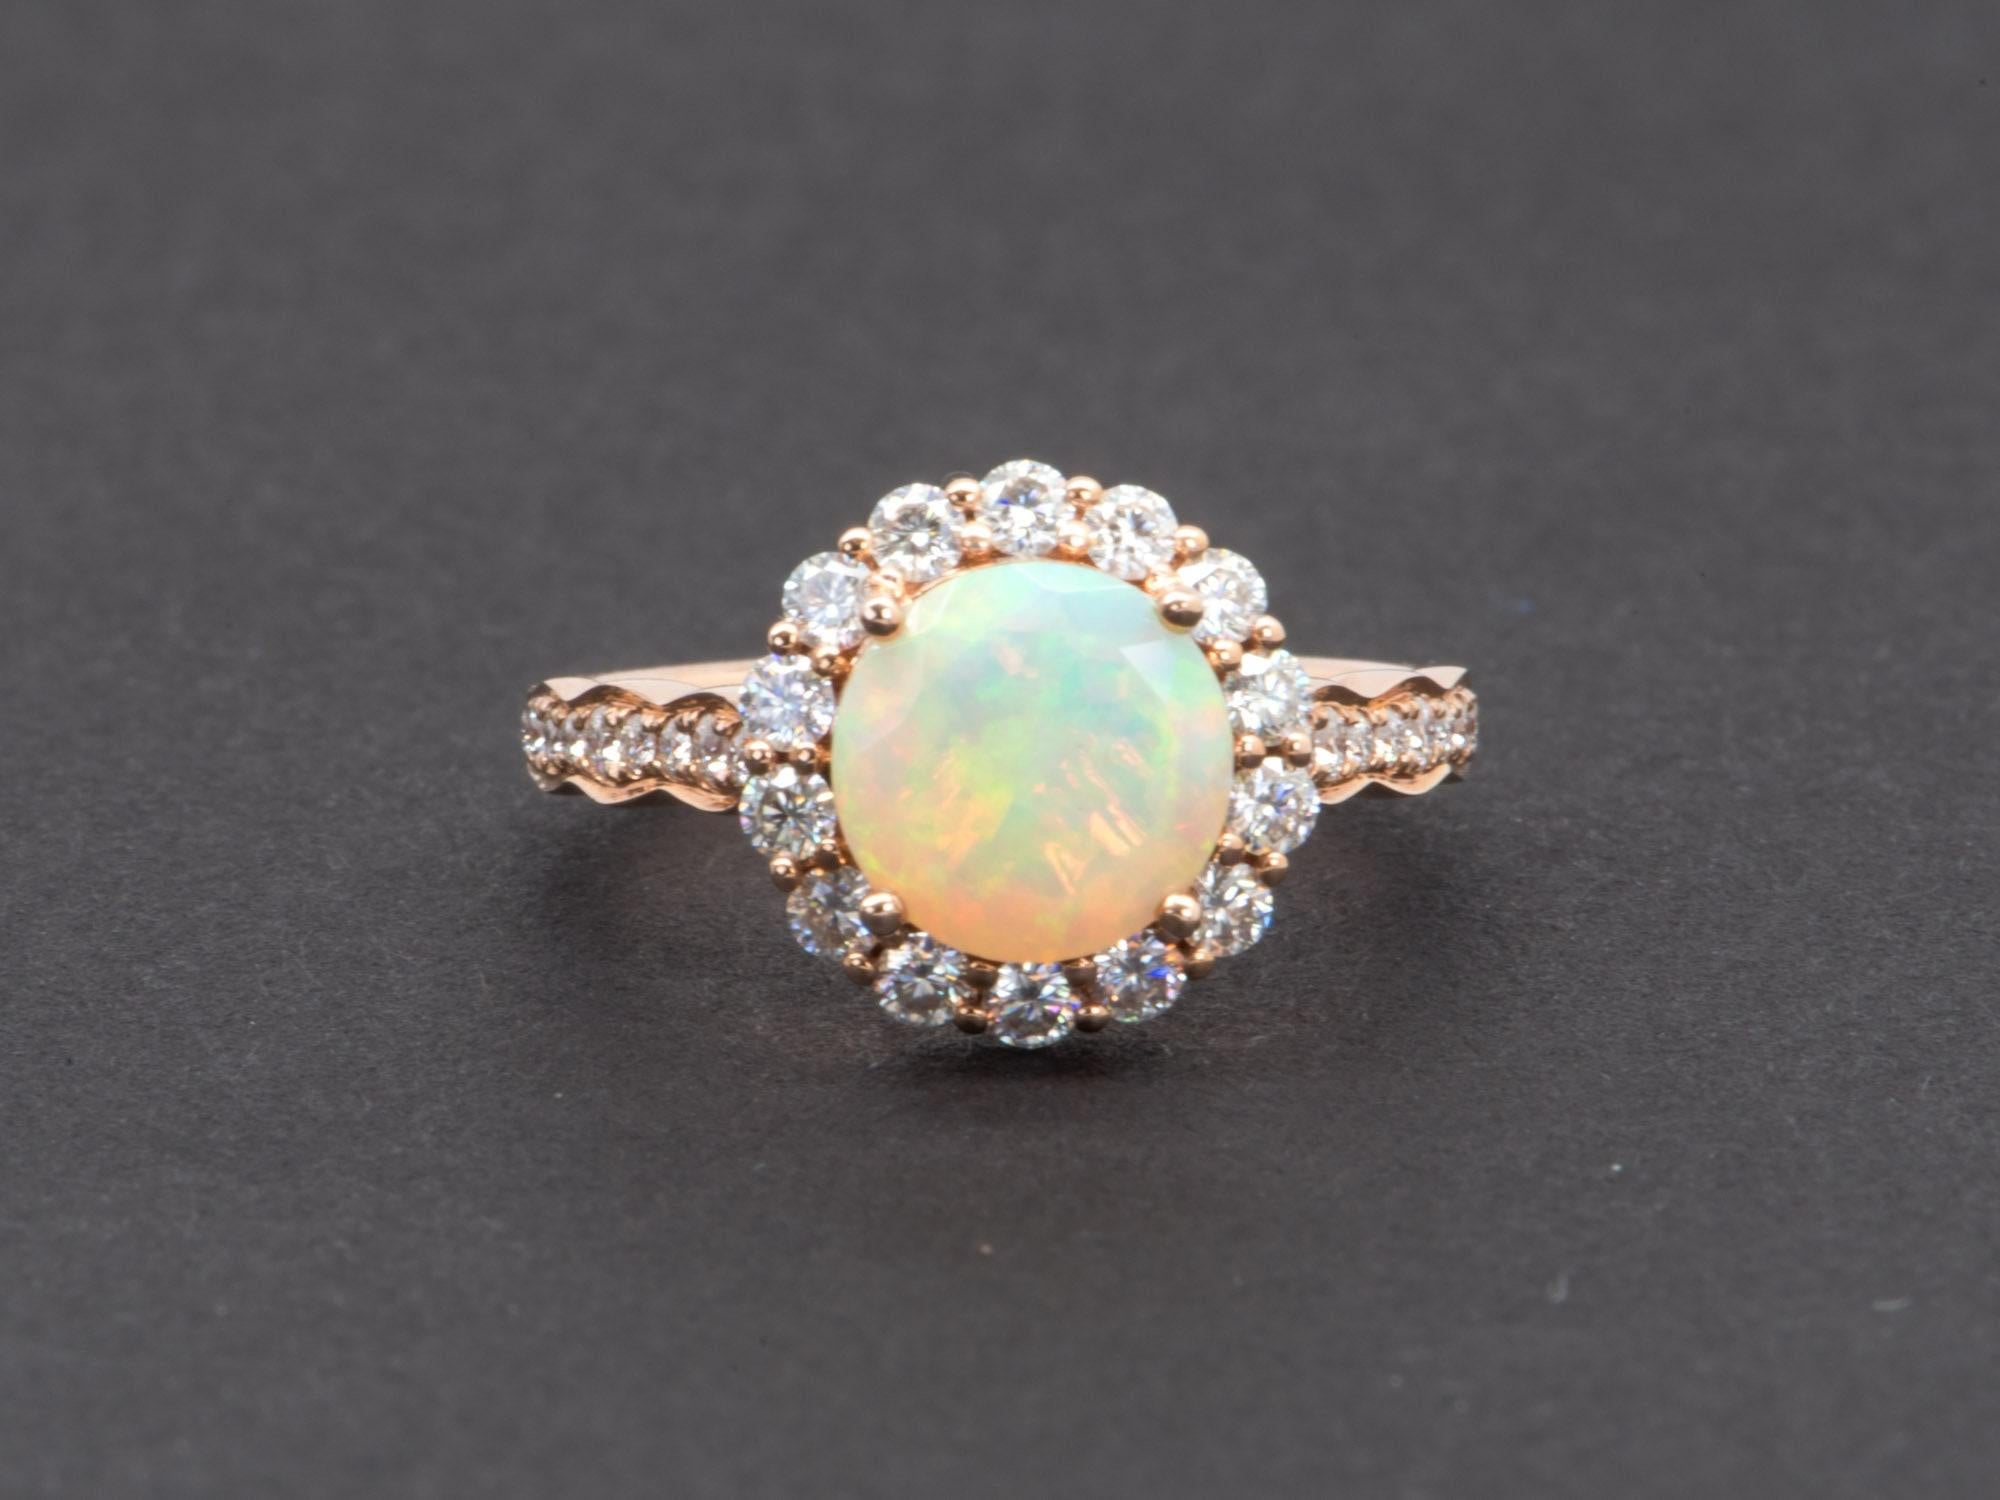 ♥ Solid 14K gold ring set with a beautiful round Ethiopian opal in the center, flanked by a halo of bright white moissanites. The shank is also decorated with gradual-sized moissanites for maximum sparkle!
♥ The opal is incredibly fiery with a